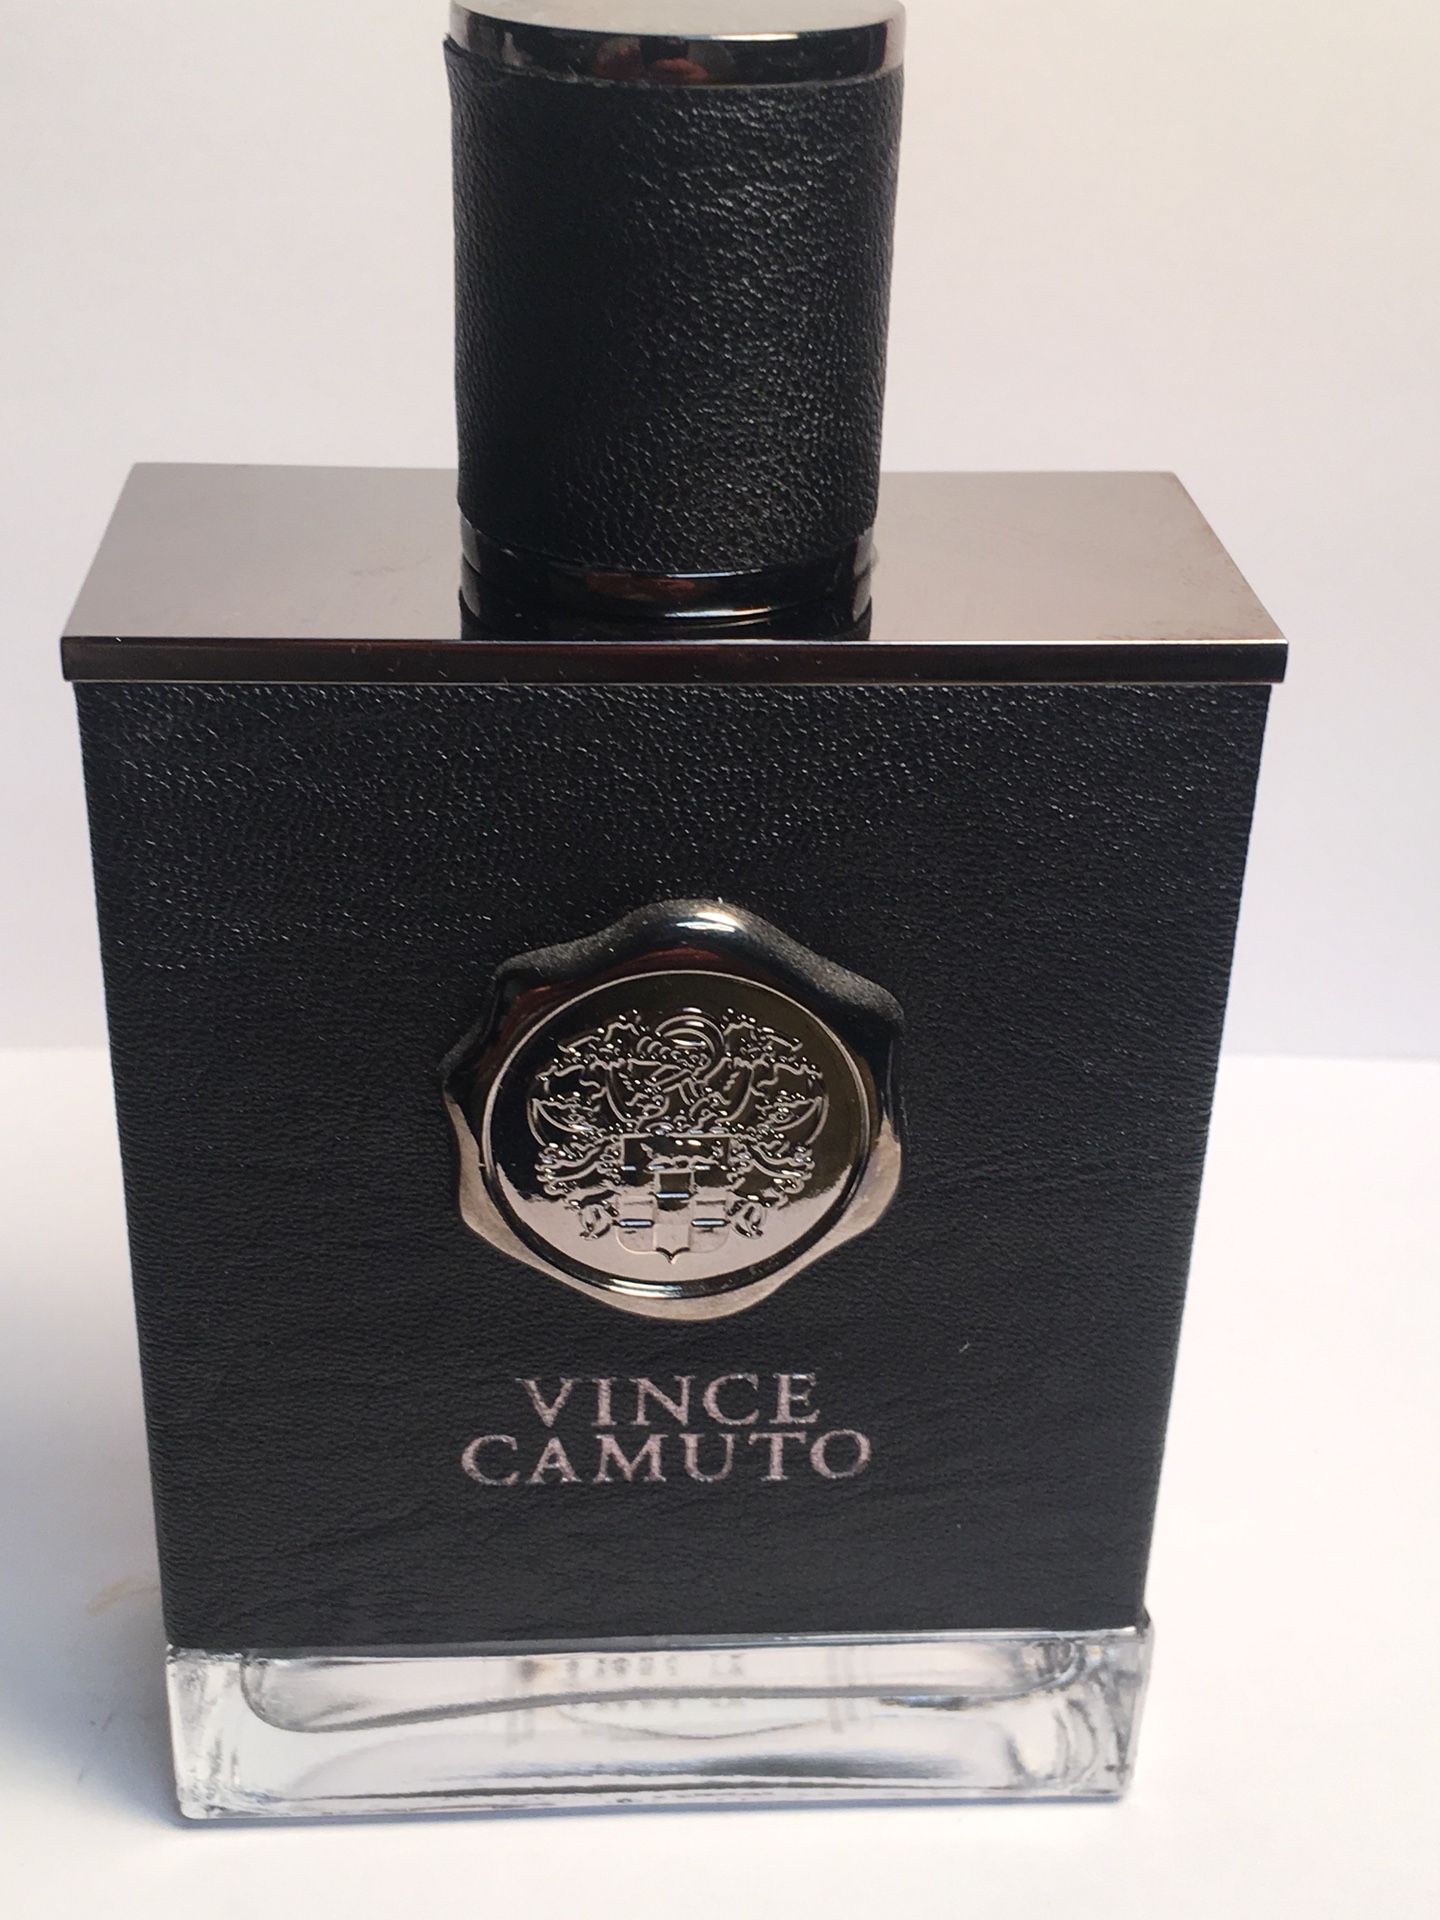 Vince Camuto cologne for men 100ml